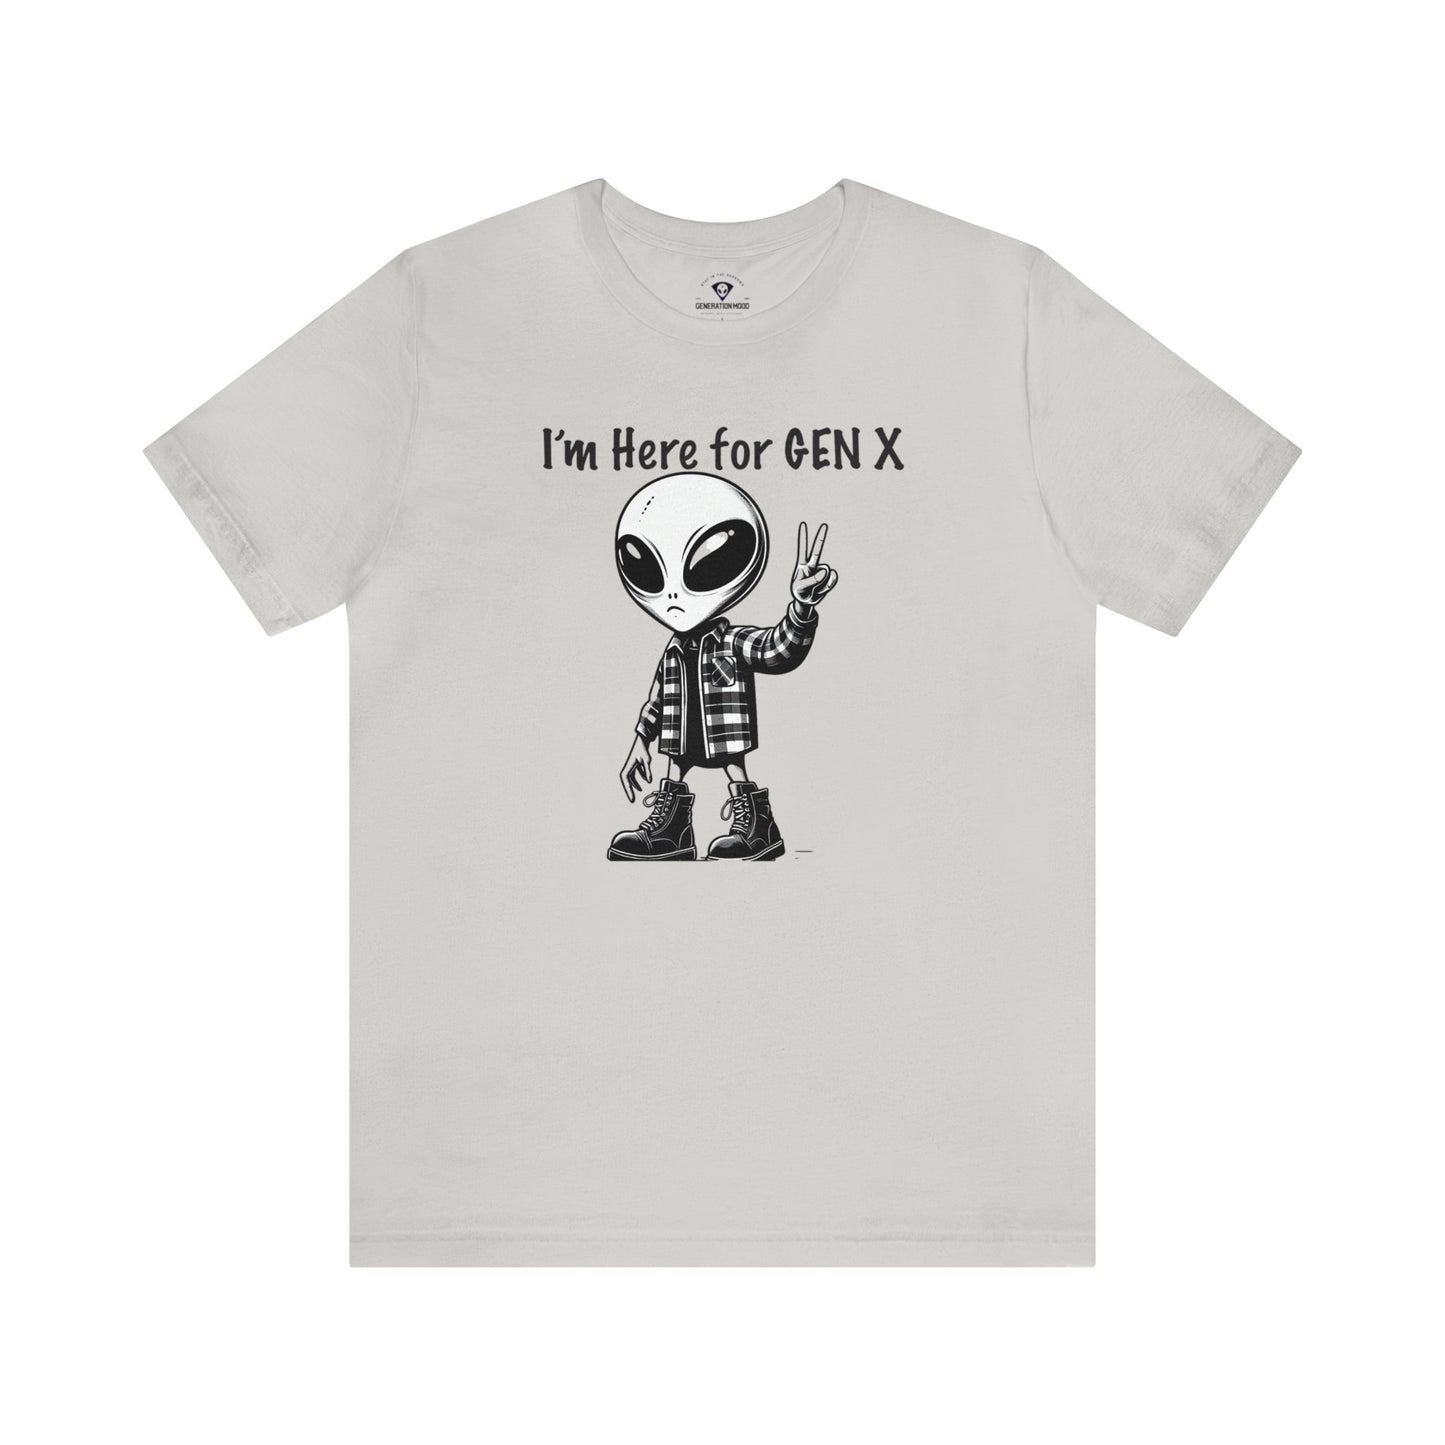 Are you a proud member of Generation X, the generation that grew up with minimal adult supervision? Do you identify with the grunge music scene, the critical thinking attitude, and the enterprising spirit of your peers? If so, you might like this T-shirt that features an alien with combat boots and a flannel shirt, flashing a peace sign, saying “I’m here for Gen X”.